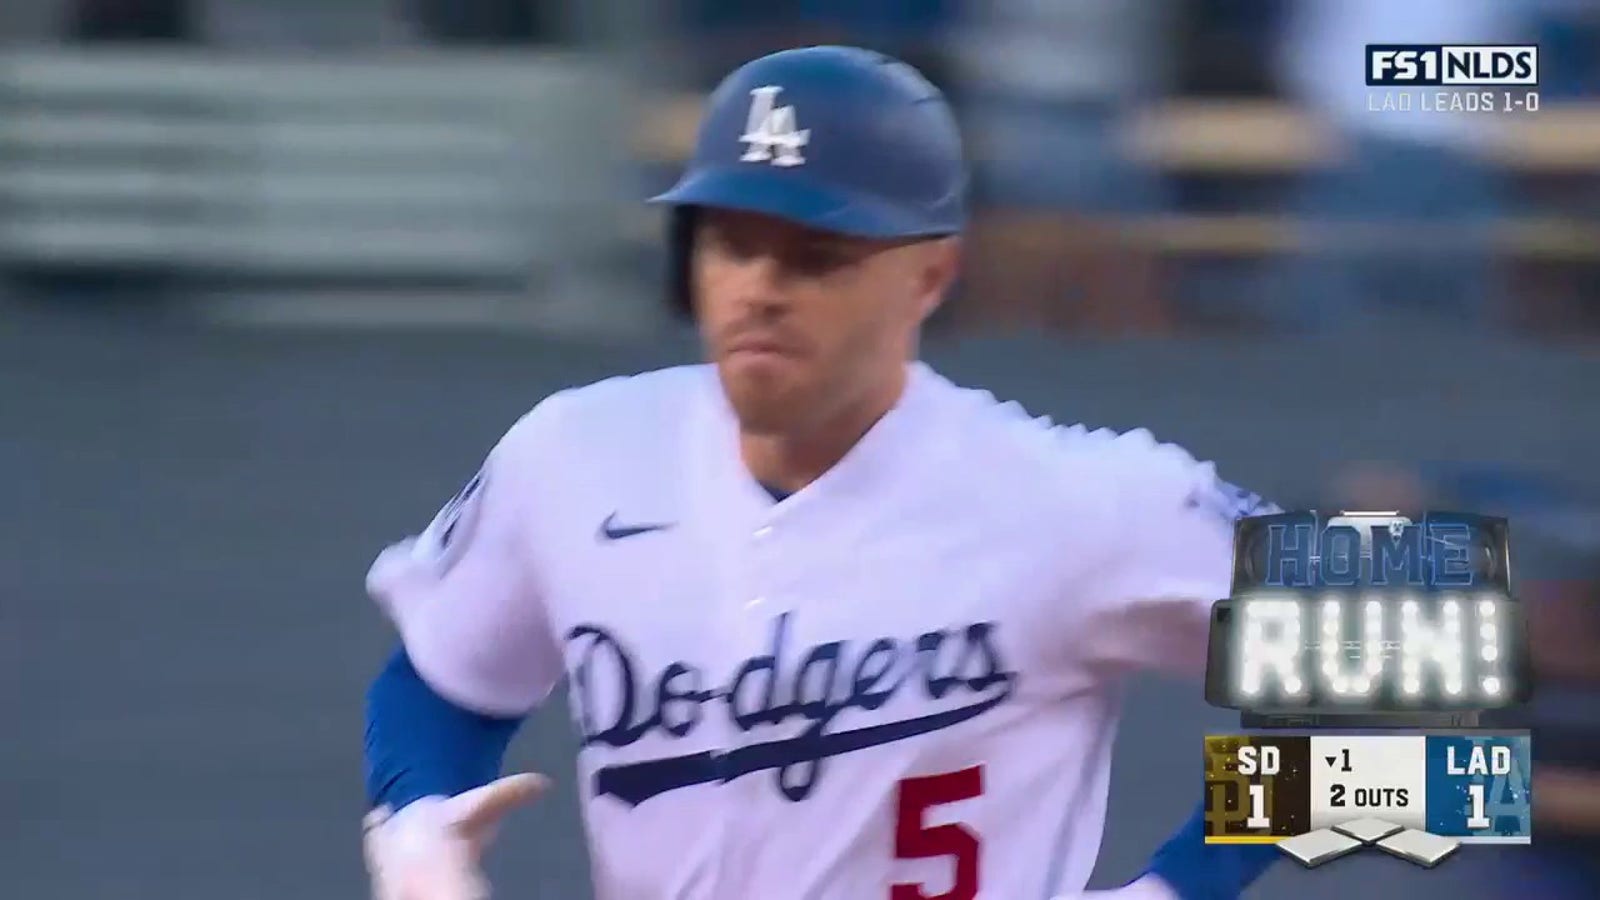 Freddie Freeman crushes a solo home run to bring Dodgers to a 1-1 tie with Padres